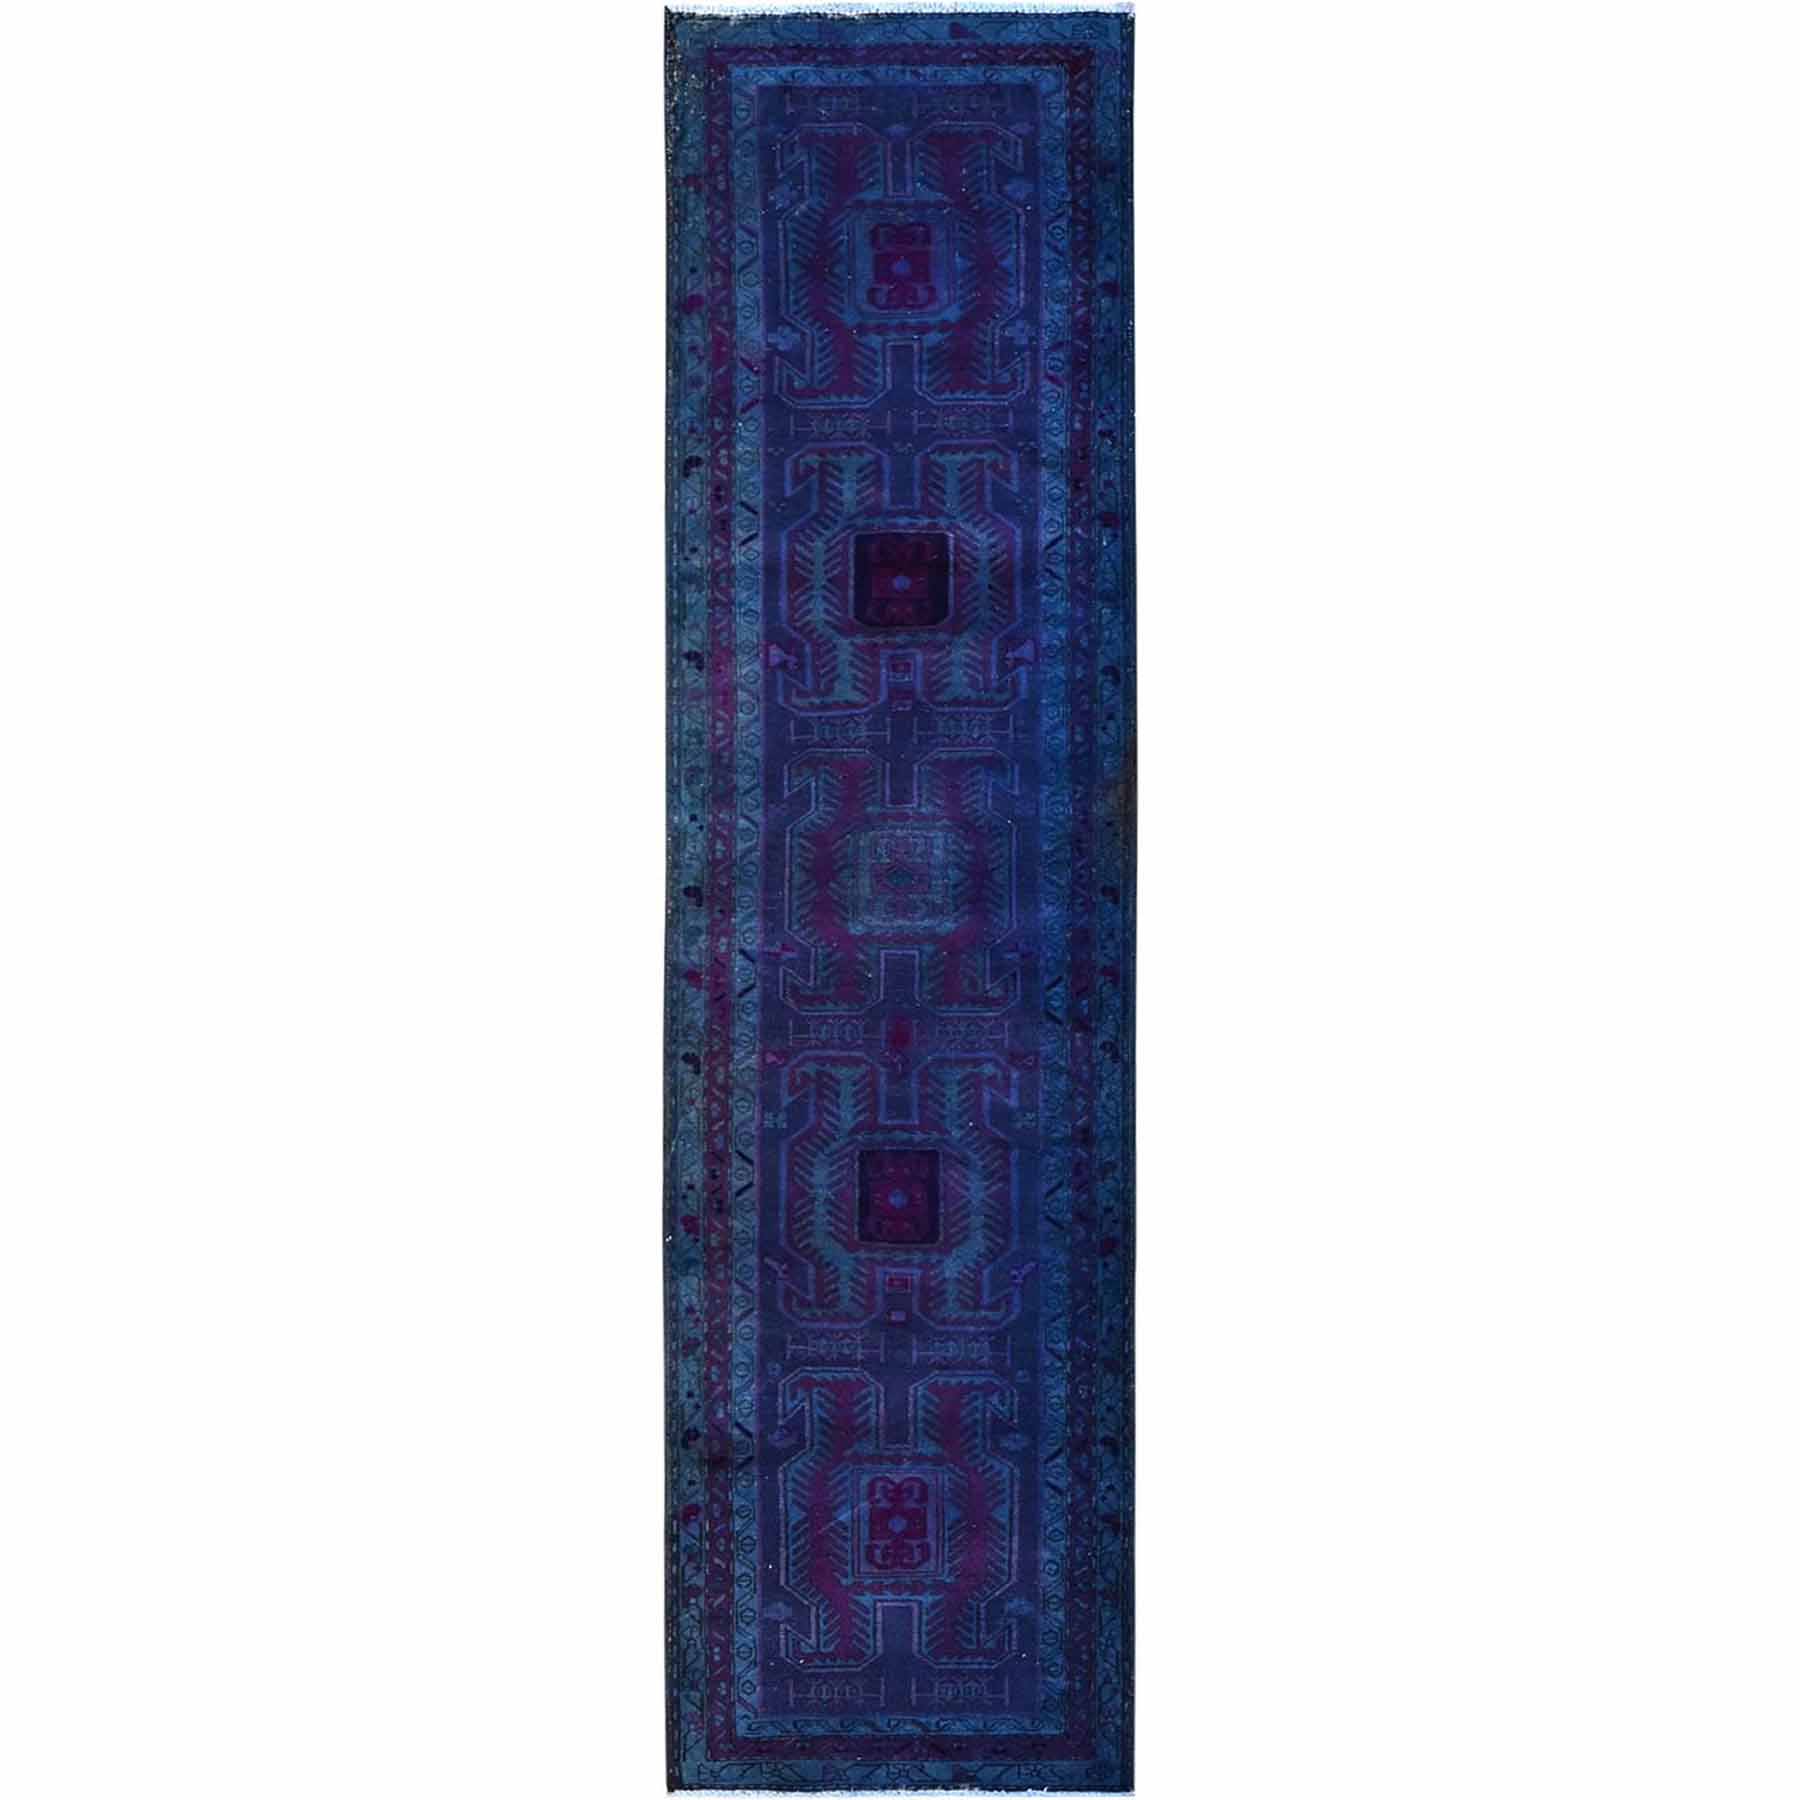 Overdyed-Vintage-Hand-Knotted-Rug-430045